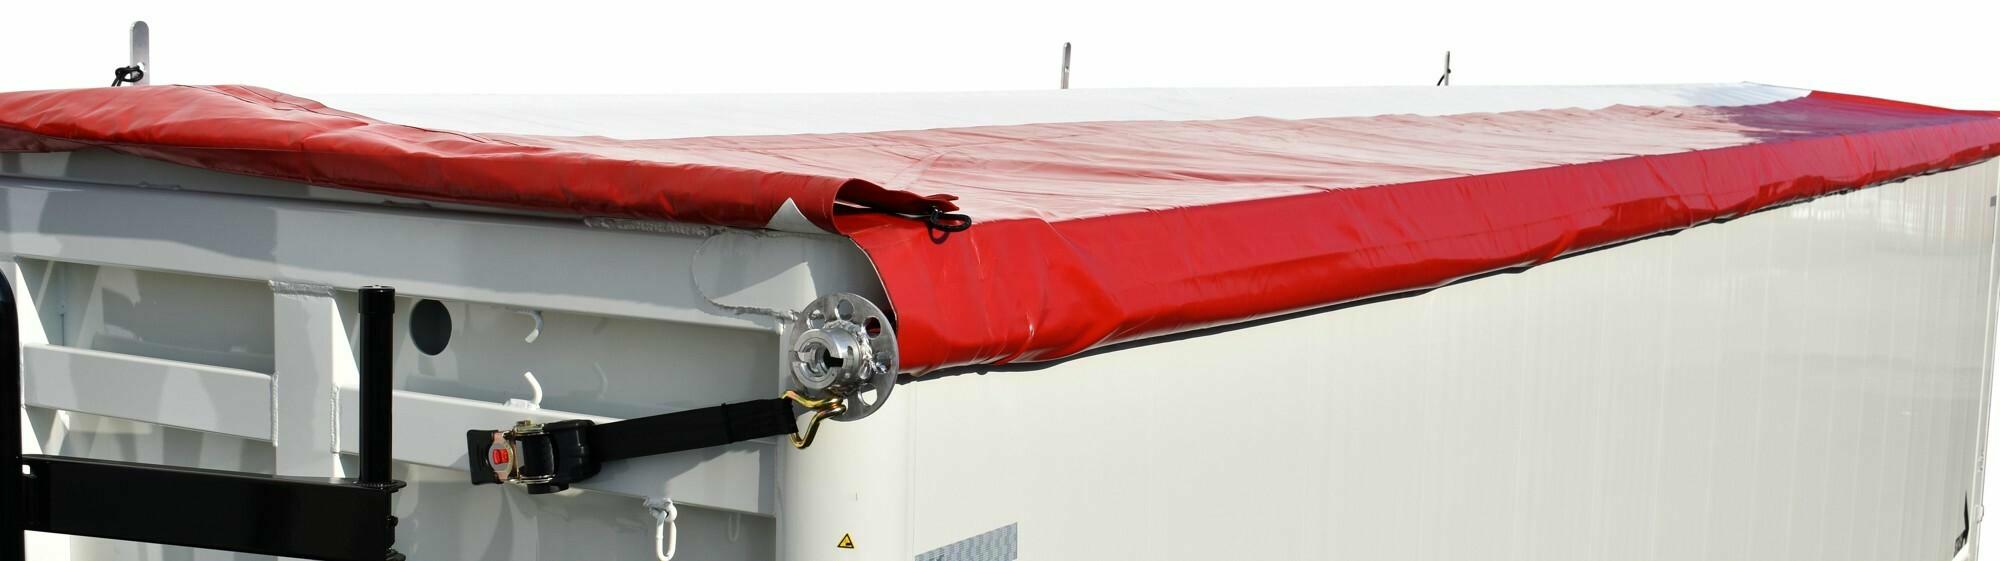 Quality sheeting to protect your trailer